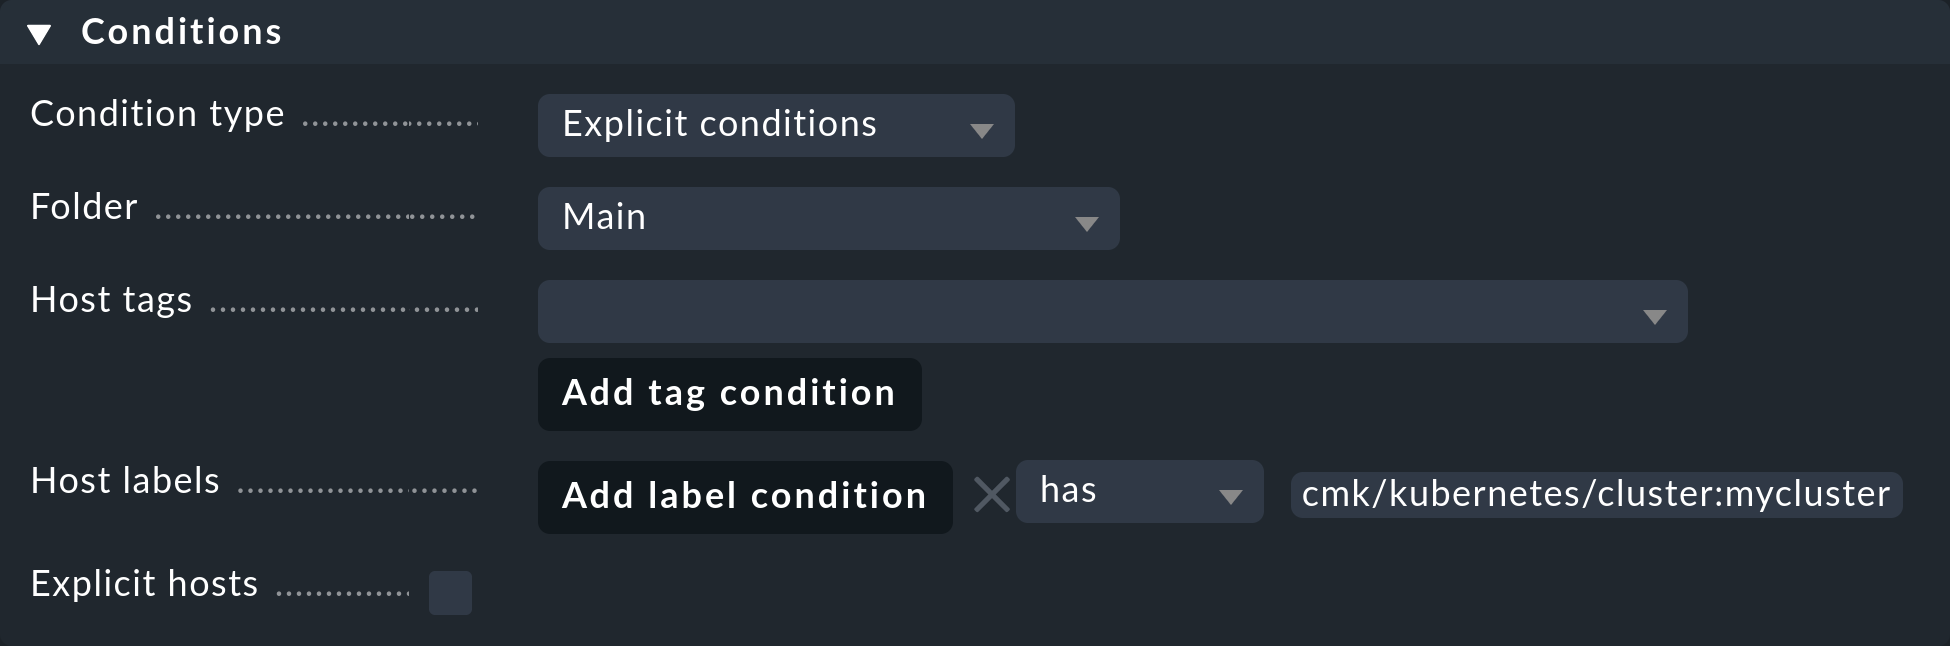 Example a restriction to hosts using a cluster-specific label.